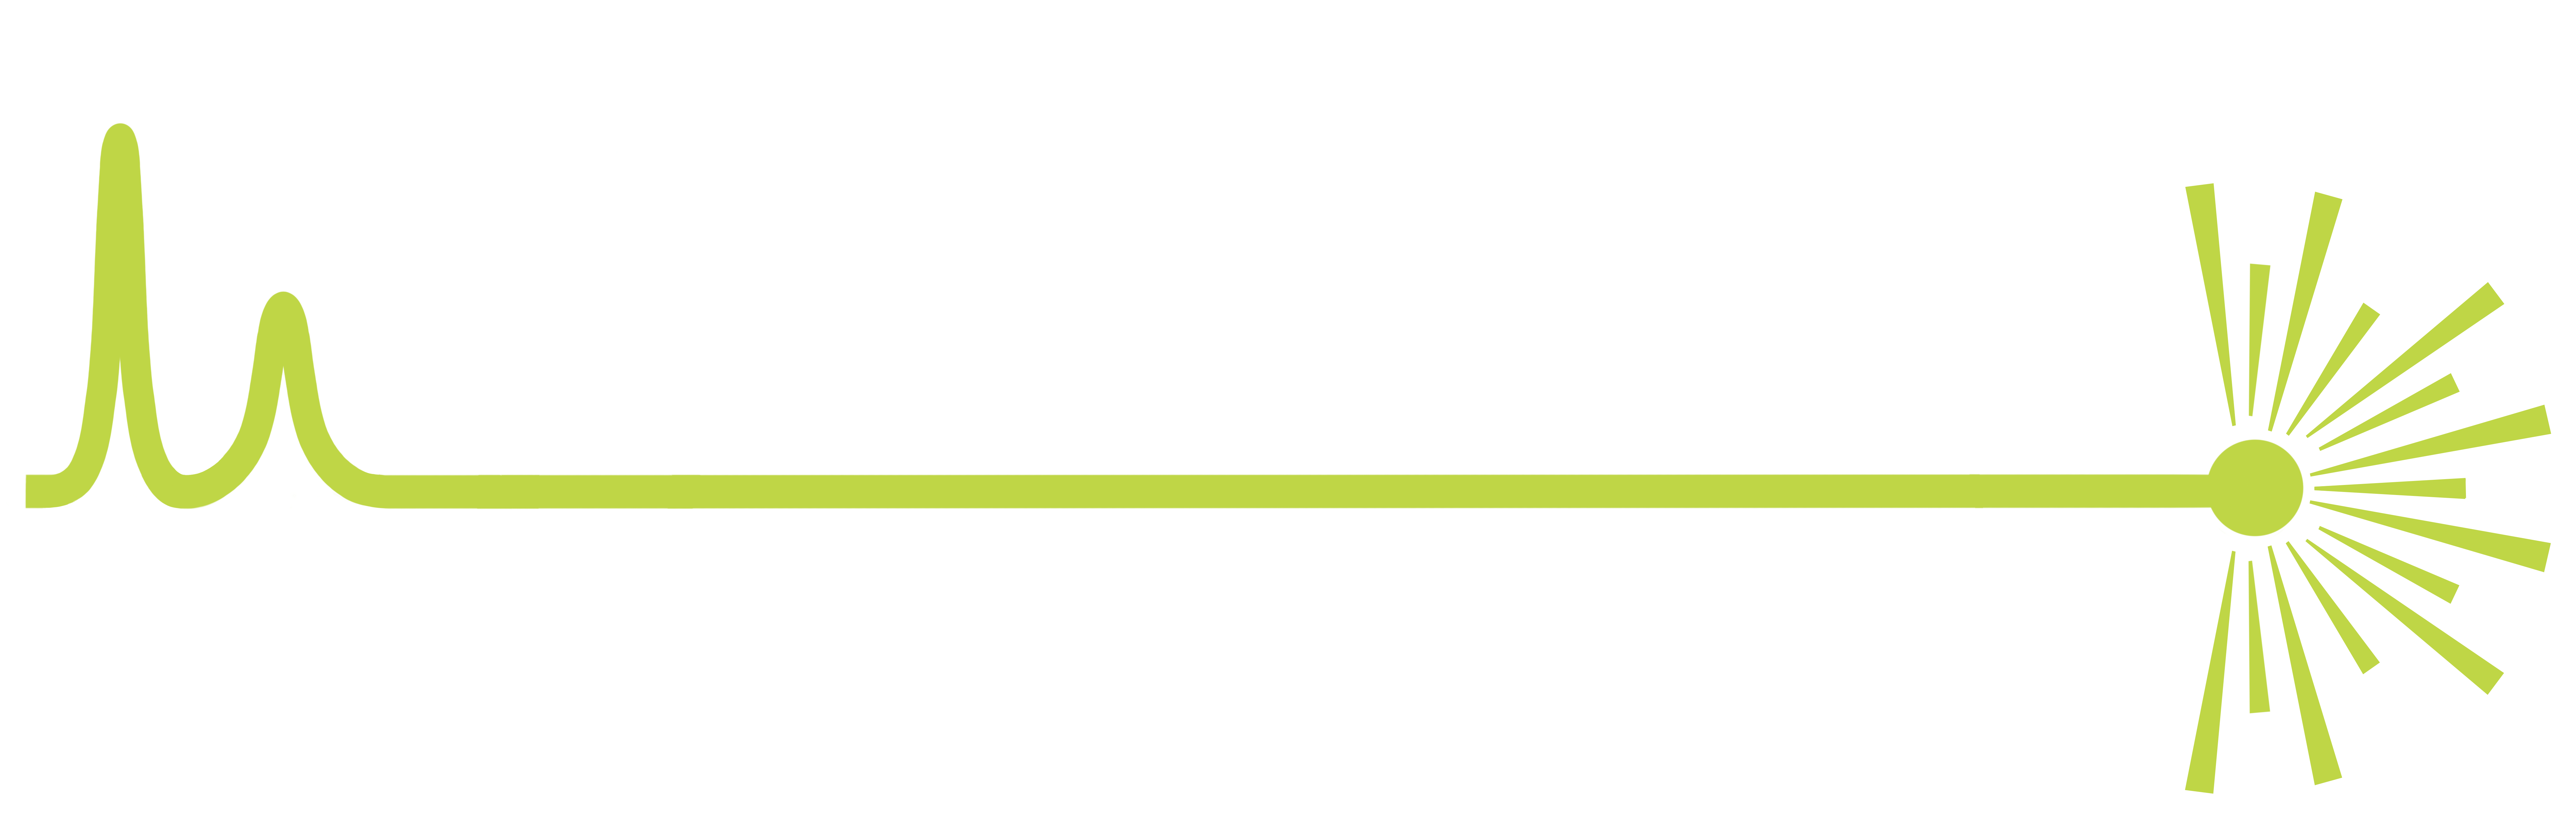 SciTech logo with white and green